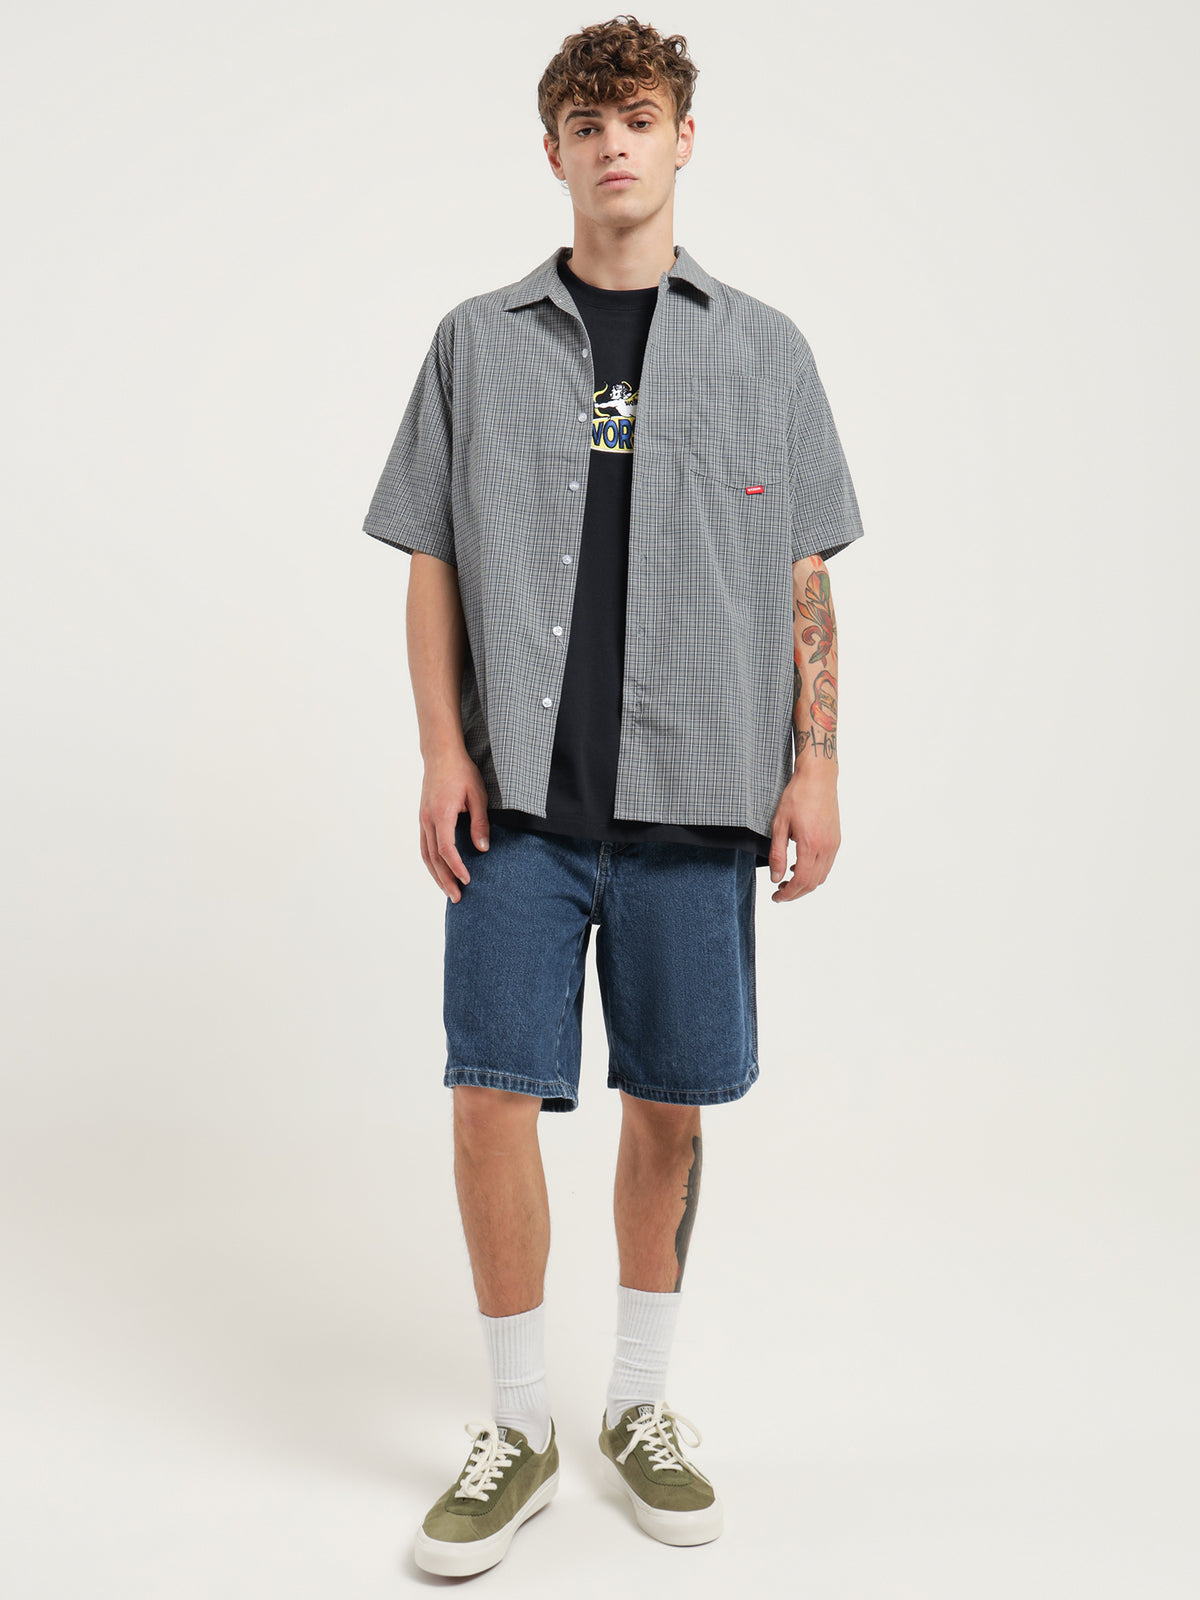 Fly Blown Short Sleeve Shirt in Check